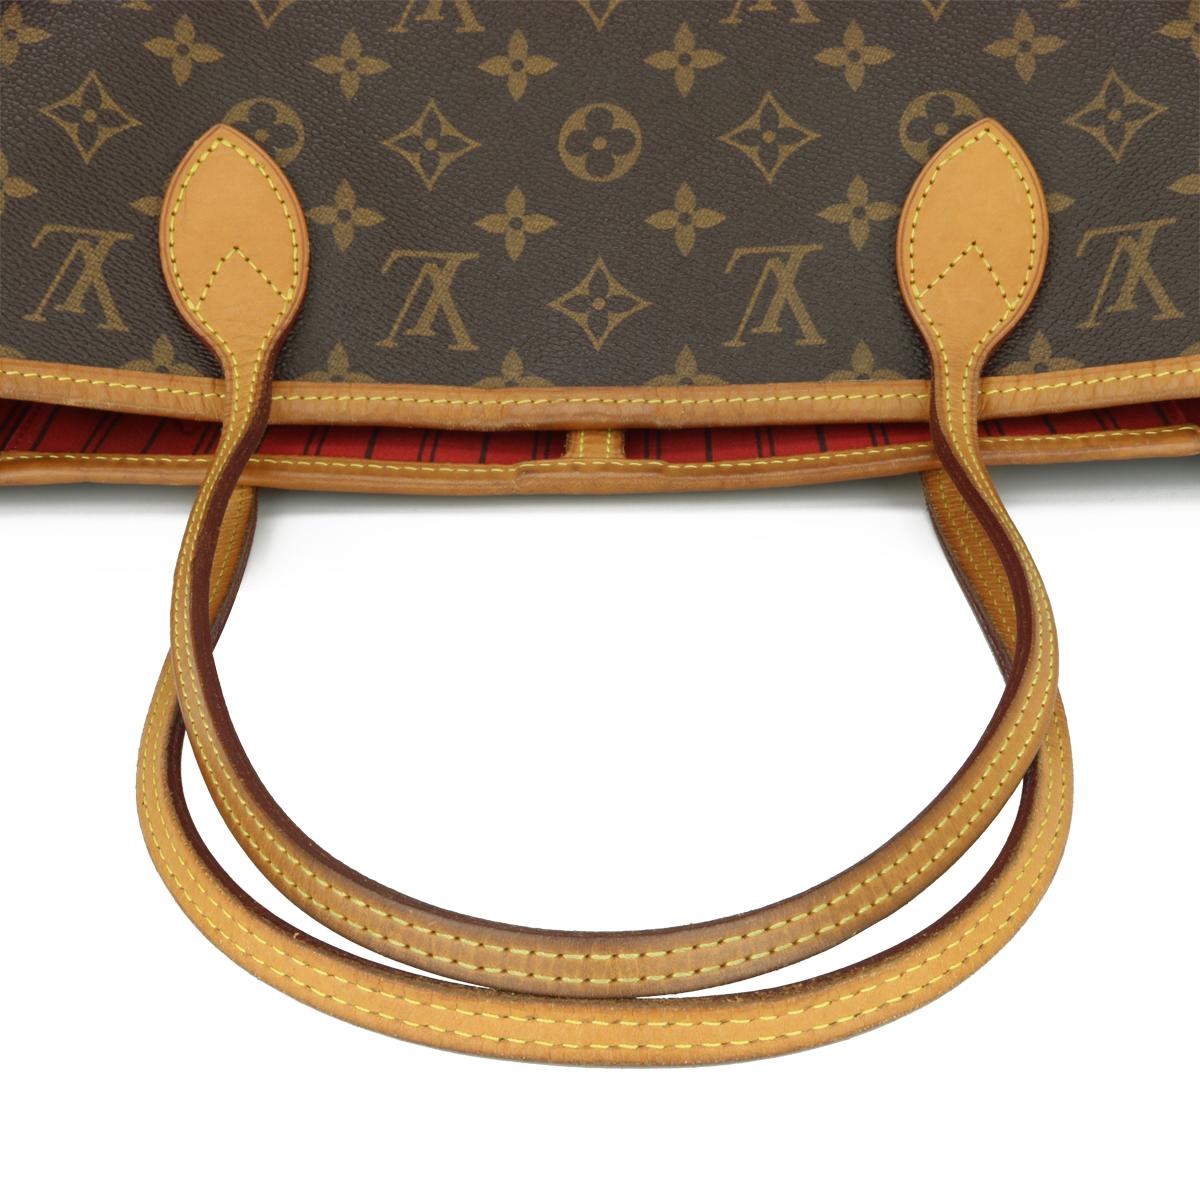 Louis Vuitton Neverfull MM Bag in Monogram with Cherry Red Interior 2019 For Sale 7